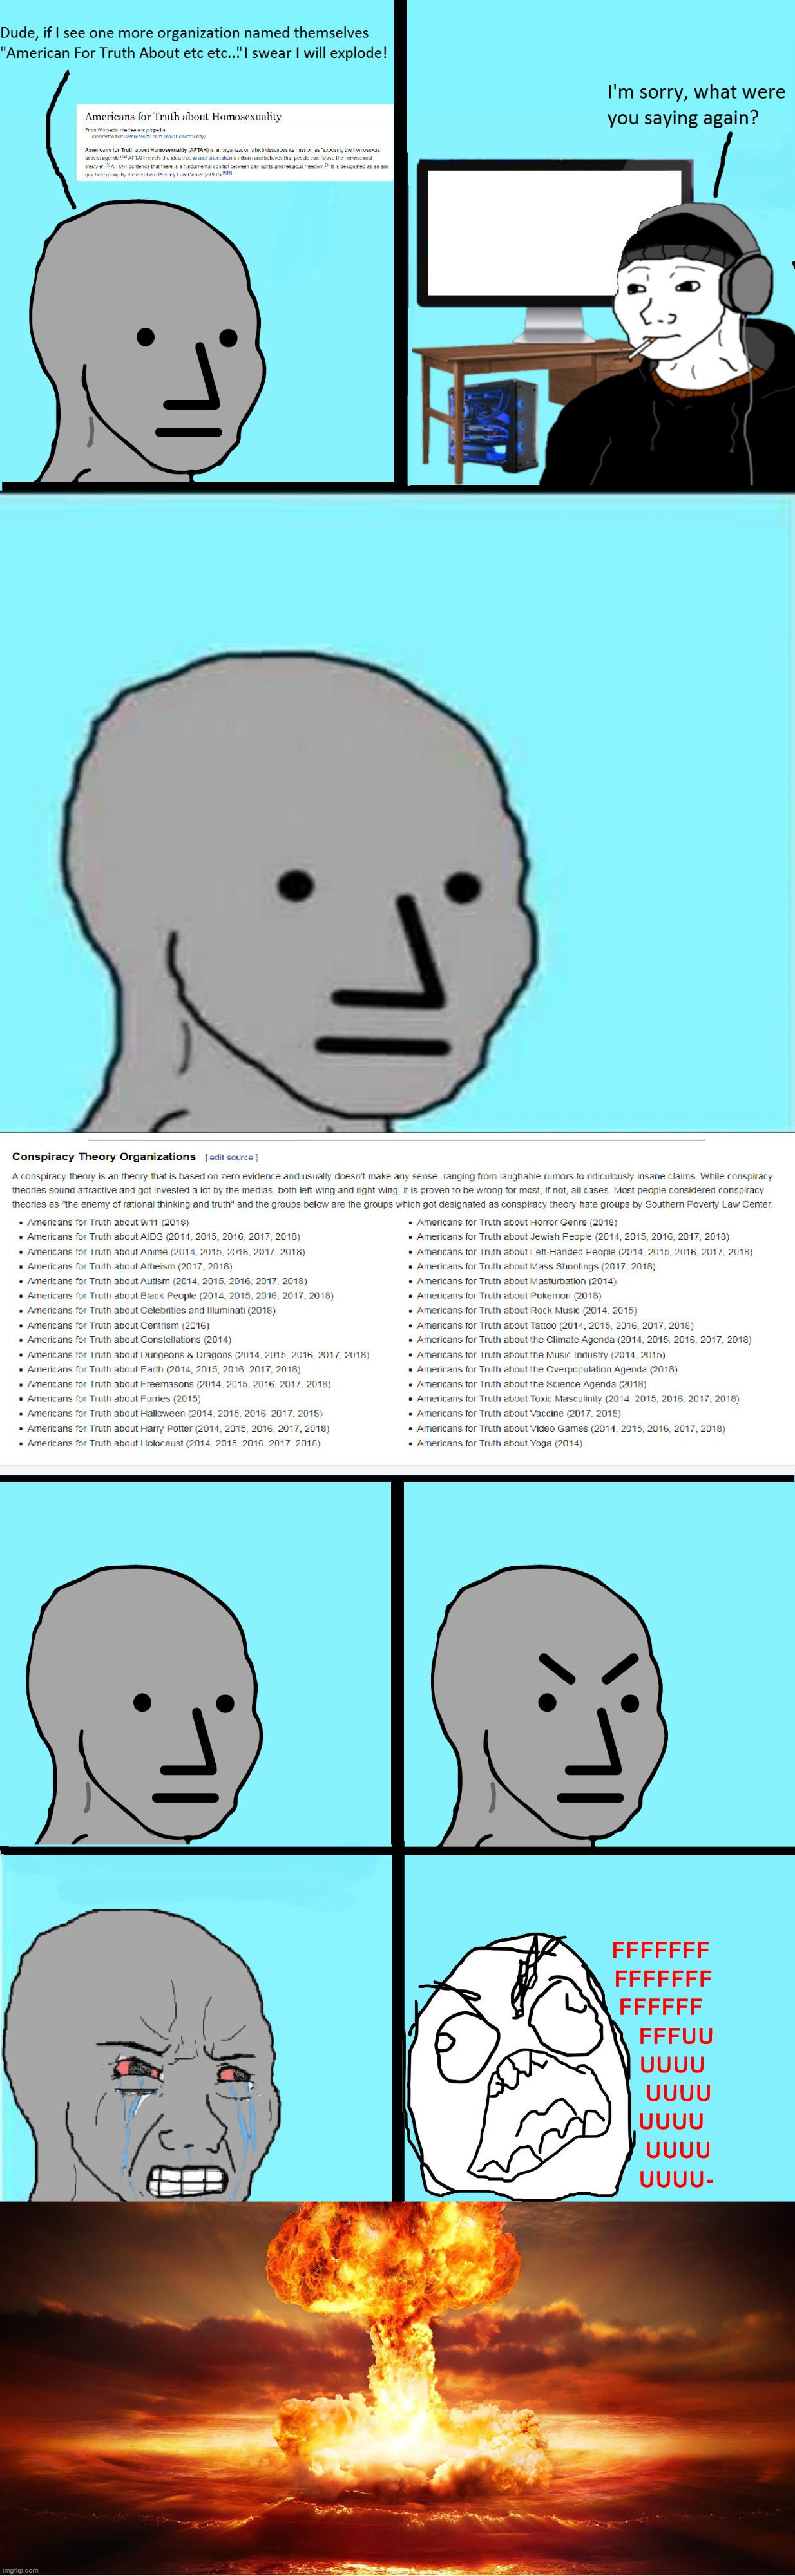 NPC Wojak Meme: Special Edition | image tagged in memes,npc,nuclear explosion,united states,conspiracy theories,fffffffuuuuuuuuuuuu | made w/ Imgflip meme maker